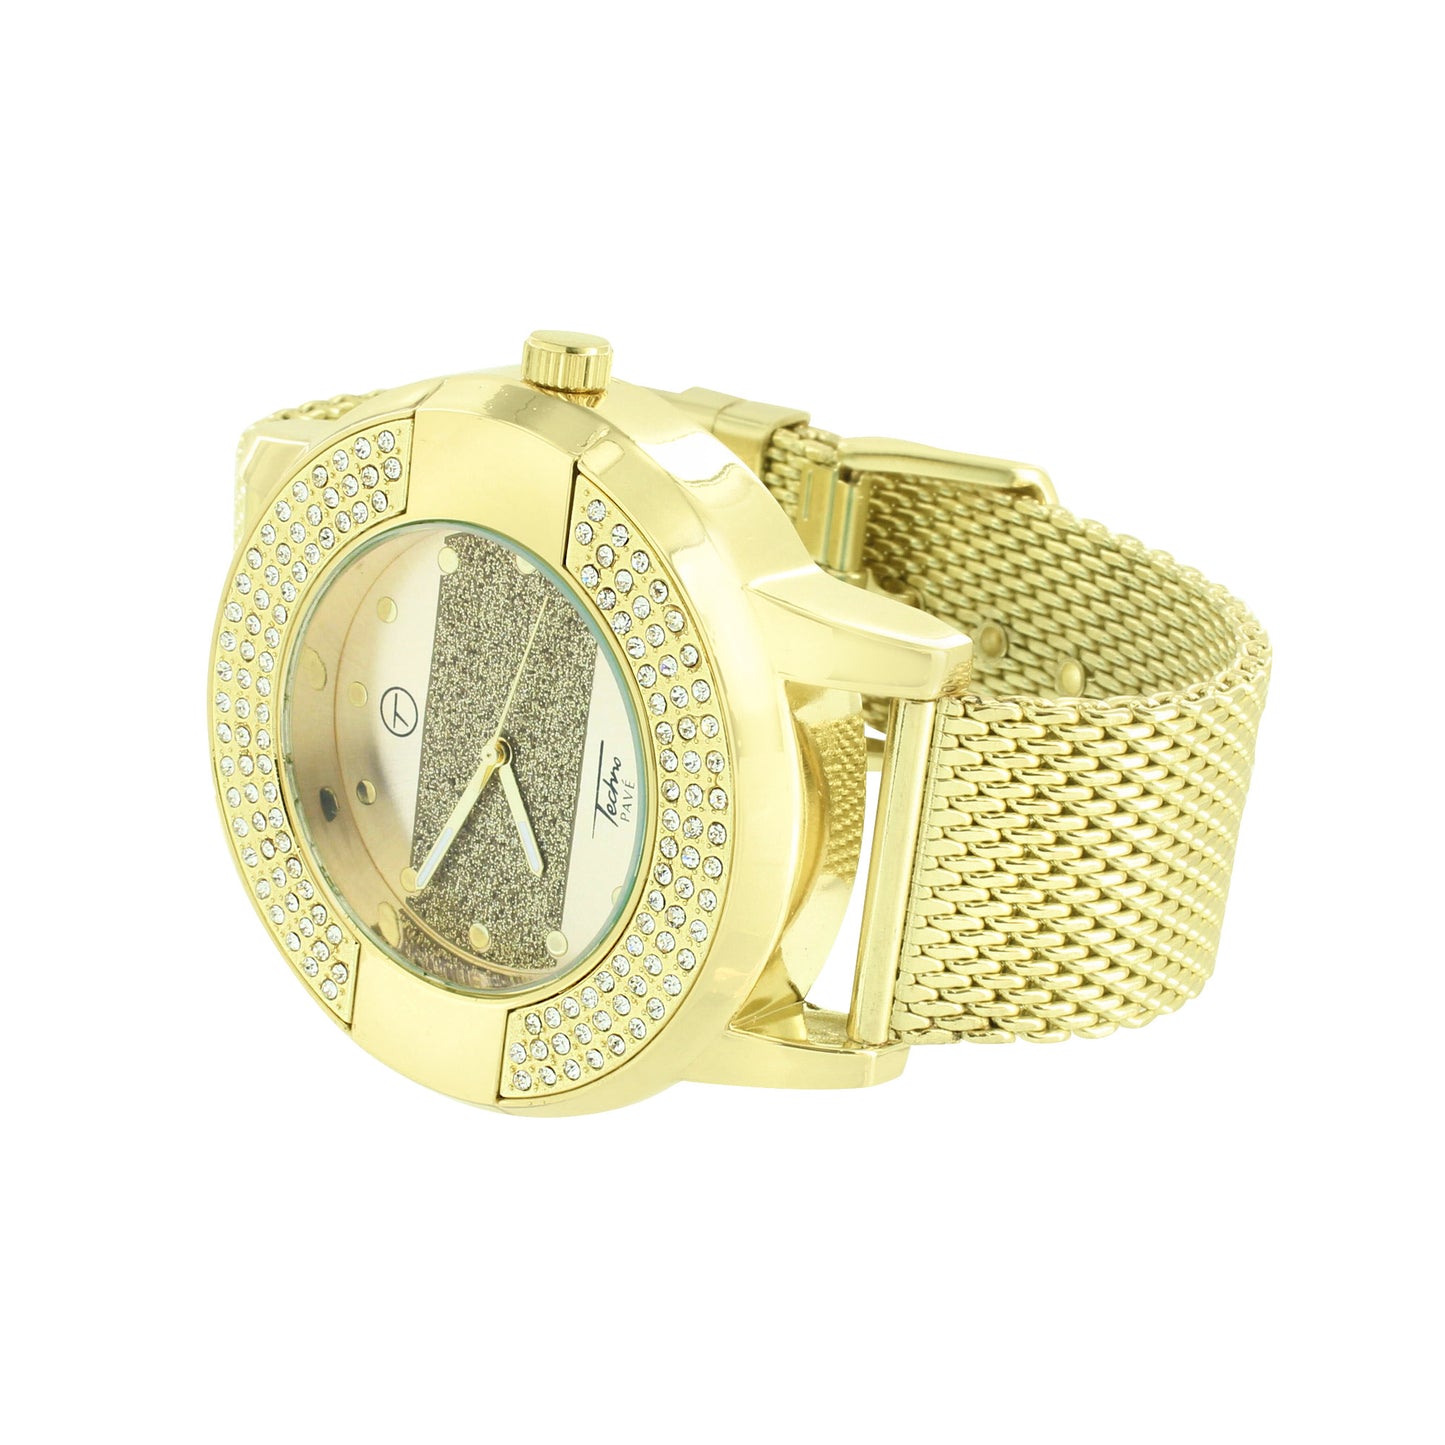 Techno Pave Mens Watch Gold Tone Dial